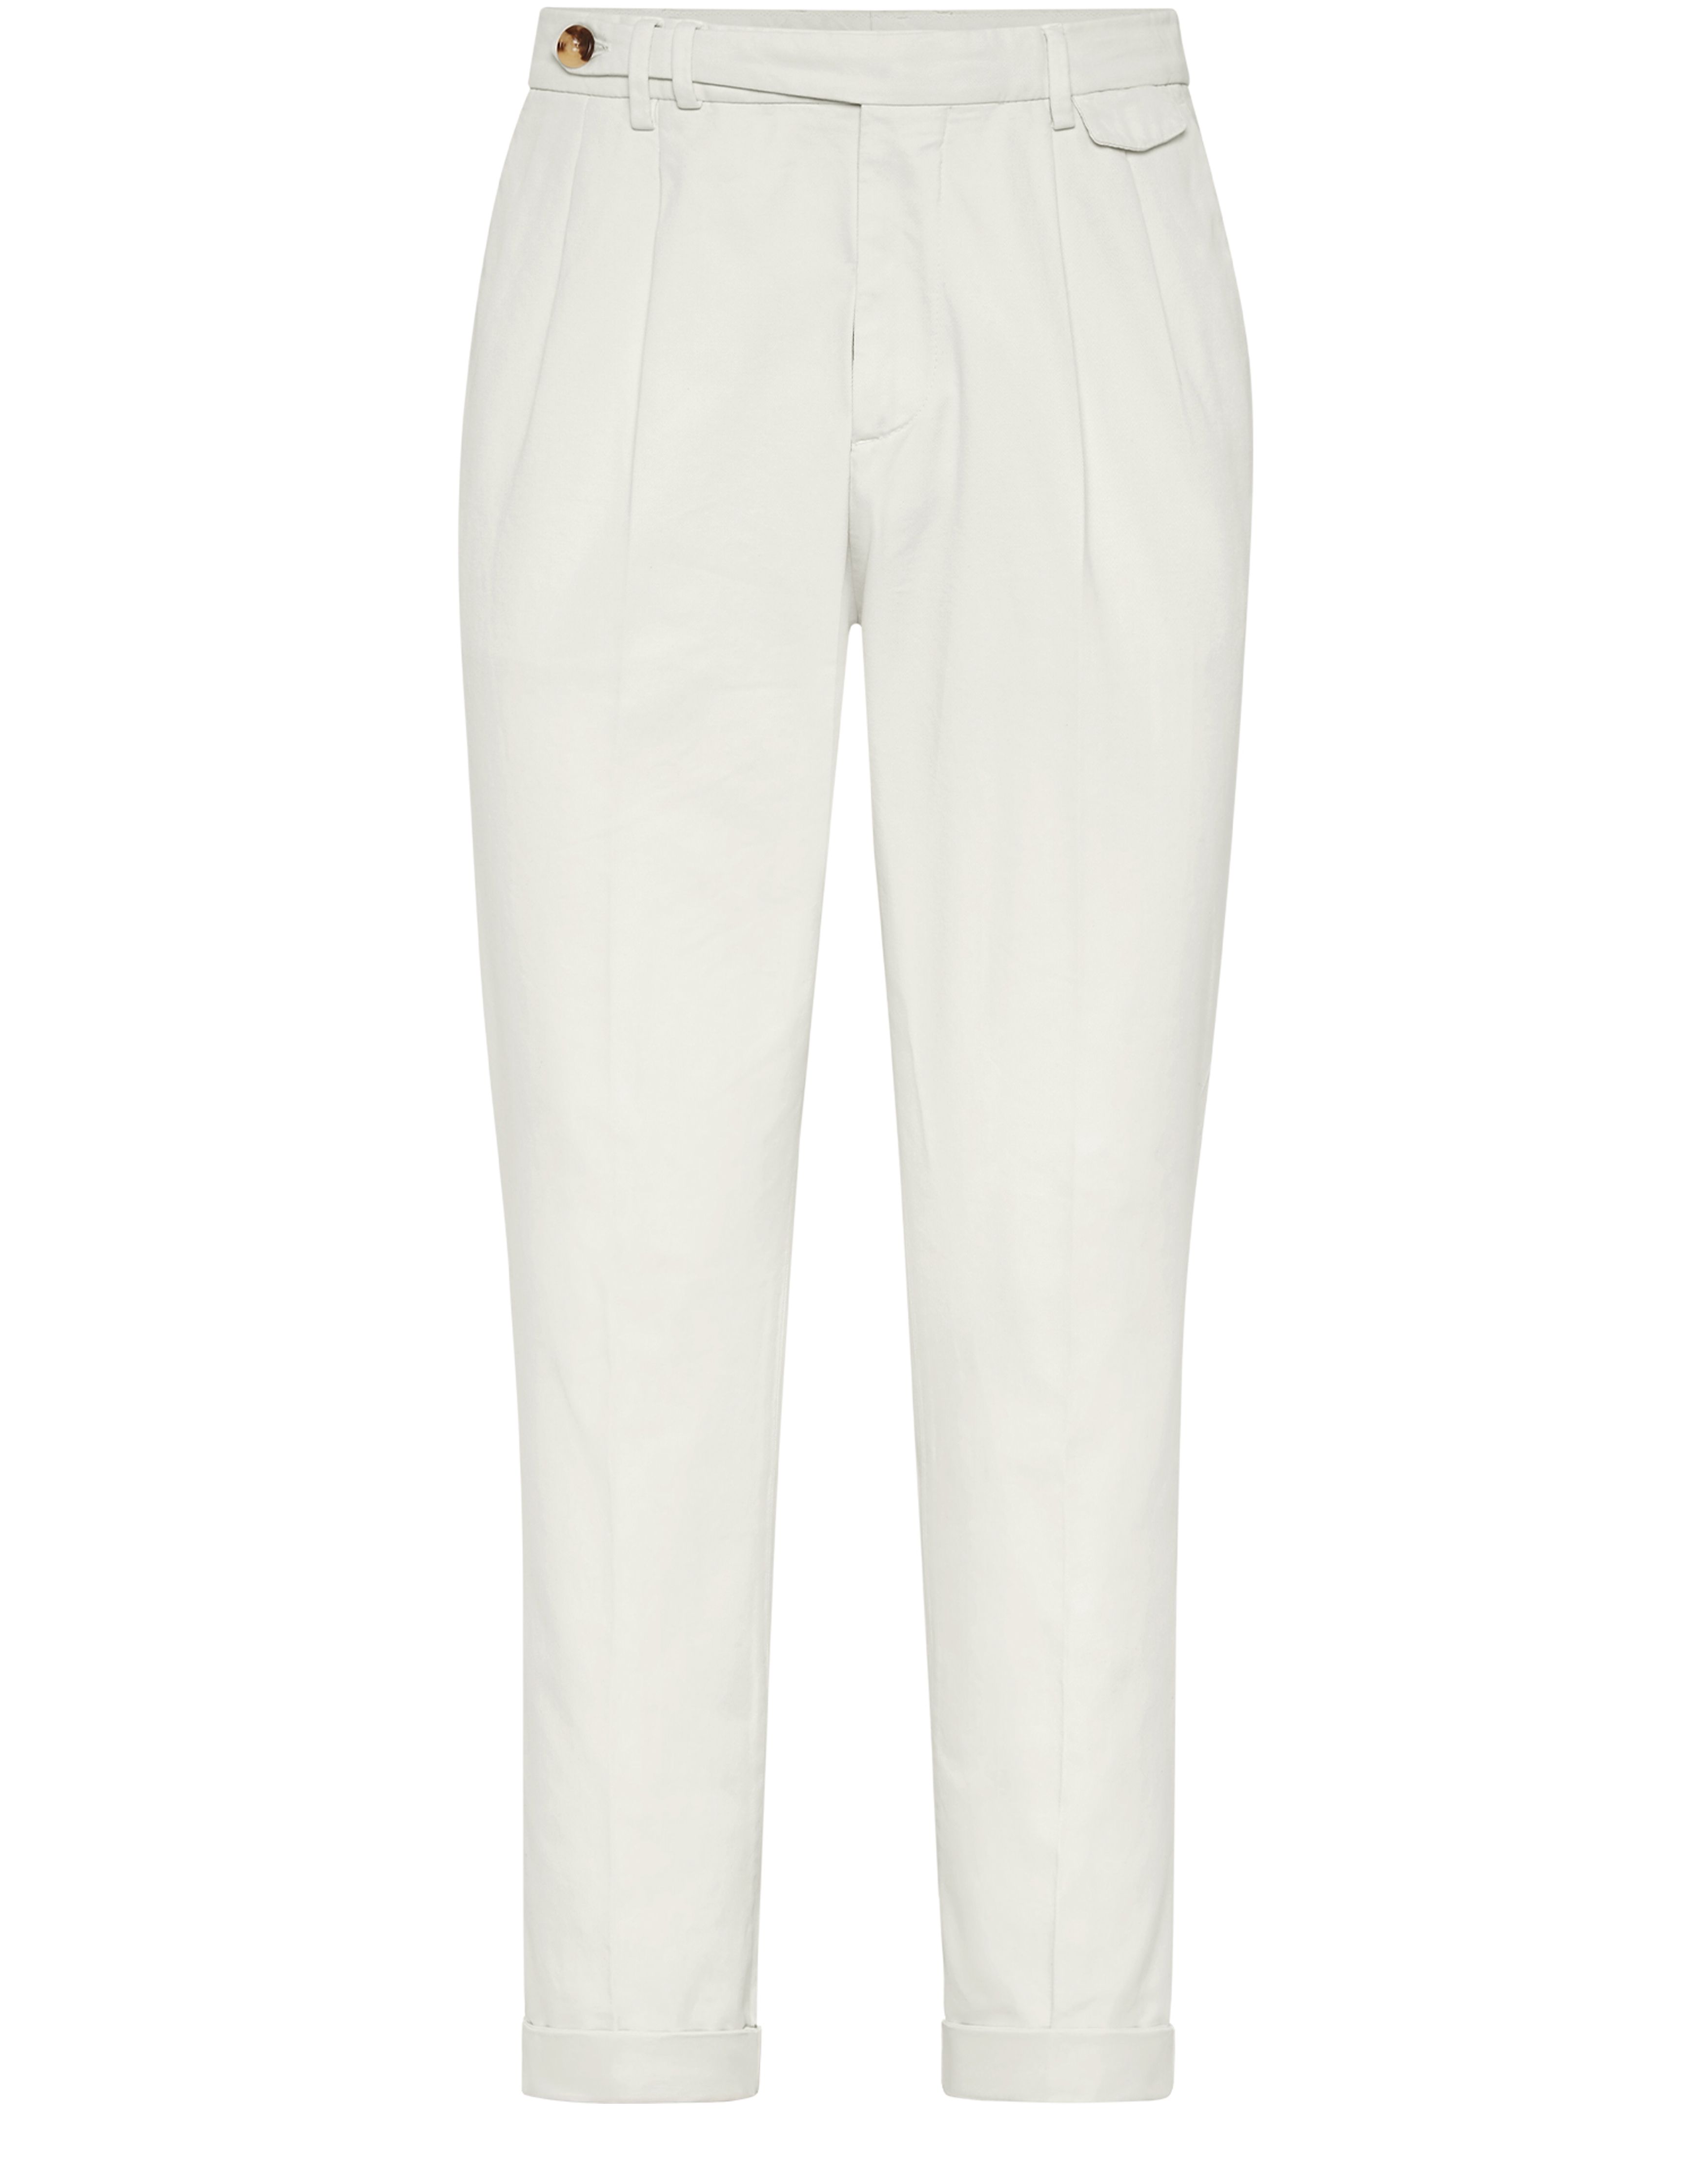 Brunello Cucinelli Leisure fit trousers with double pleats